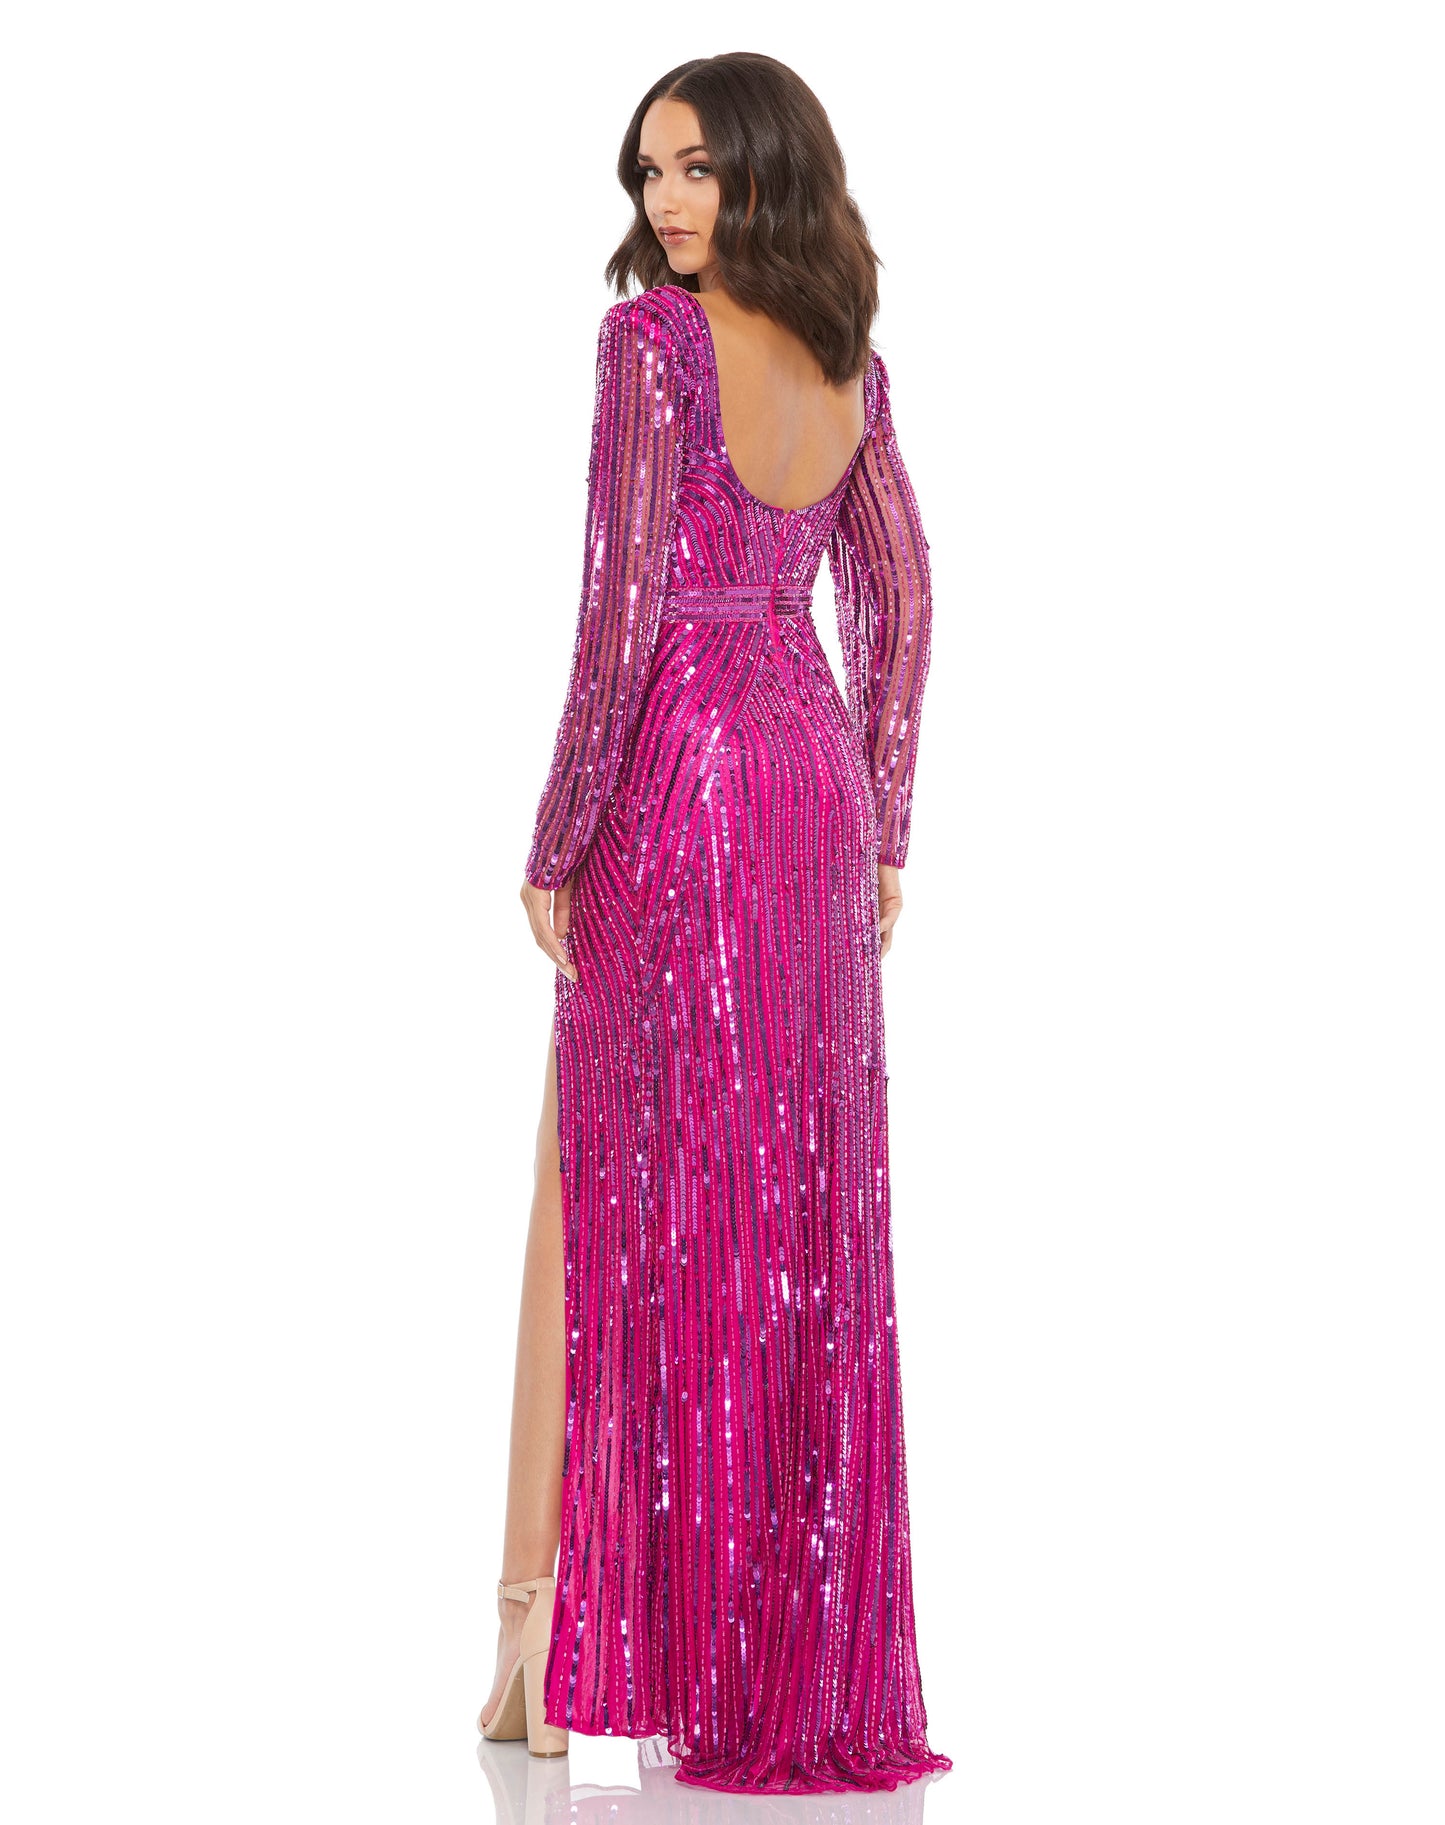 Mac Duggal Sequin fabric (100% polyester) {fabric} Fully Lined Sweetheart Neckline Long Sleeve Concealed Back Zipper Approx. 62.5" from top of shoulder to bottom hem Style #5379